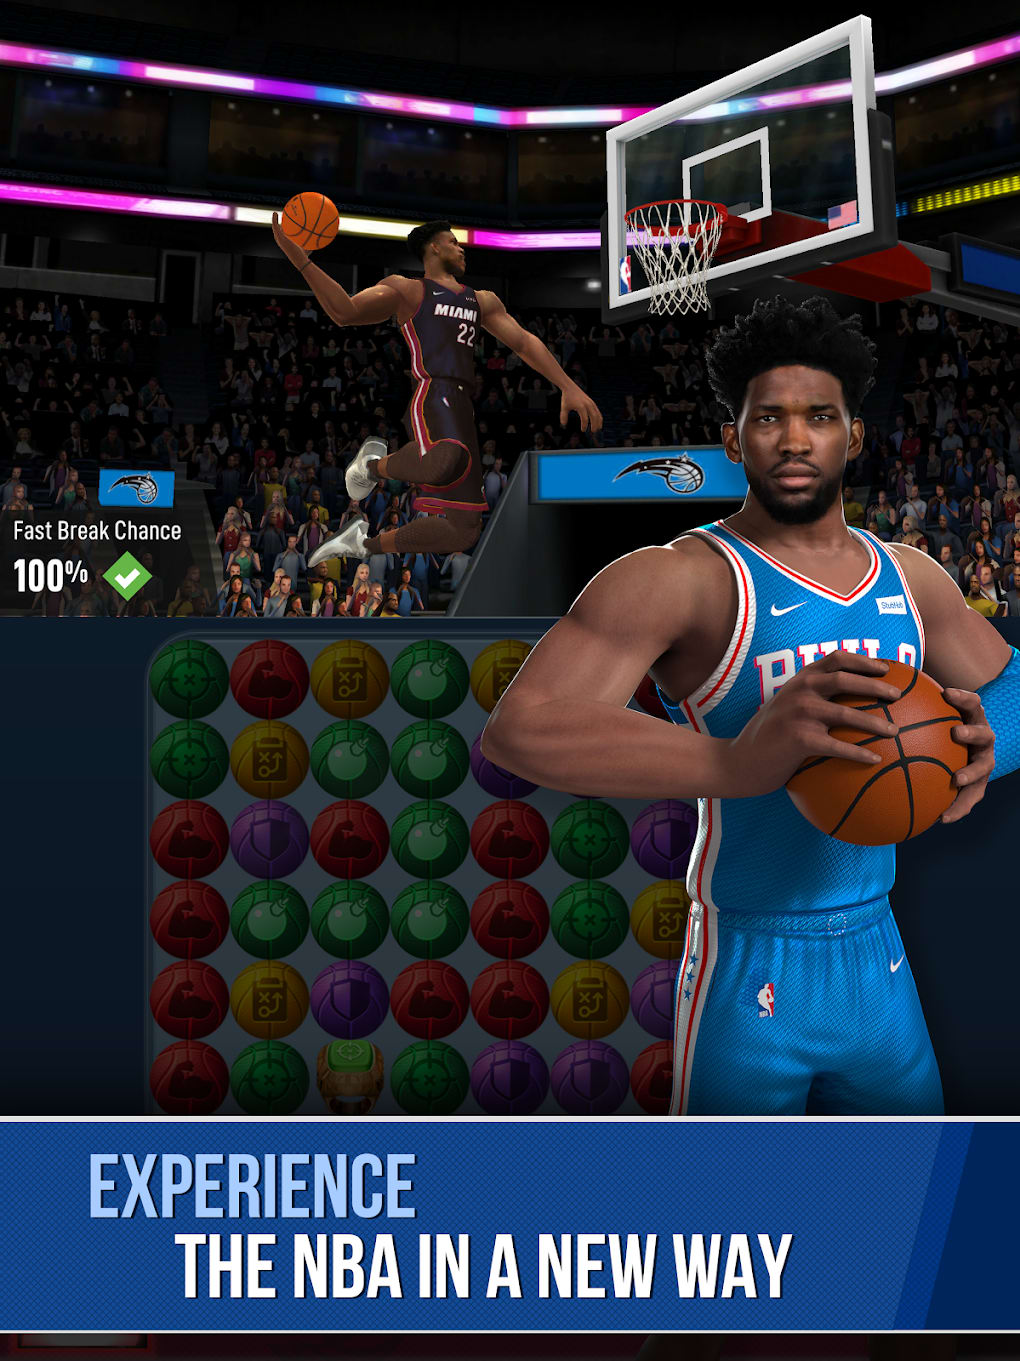 NBA Ball Stars Play with your Favorite NBA Stars APK for Android